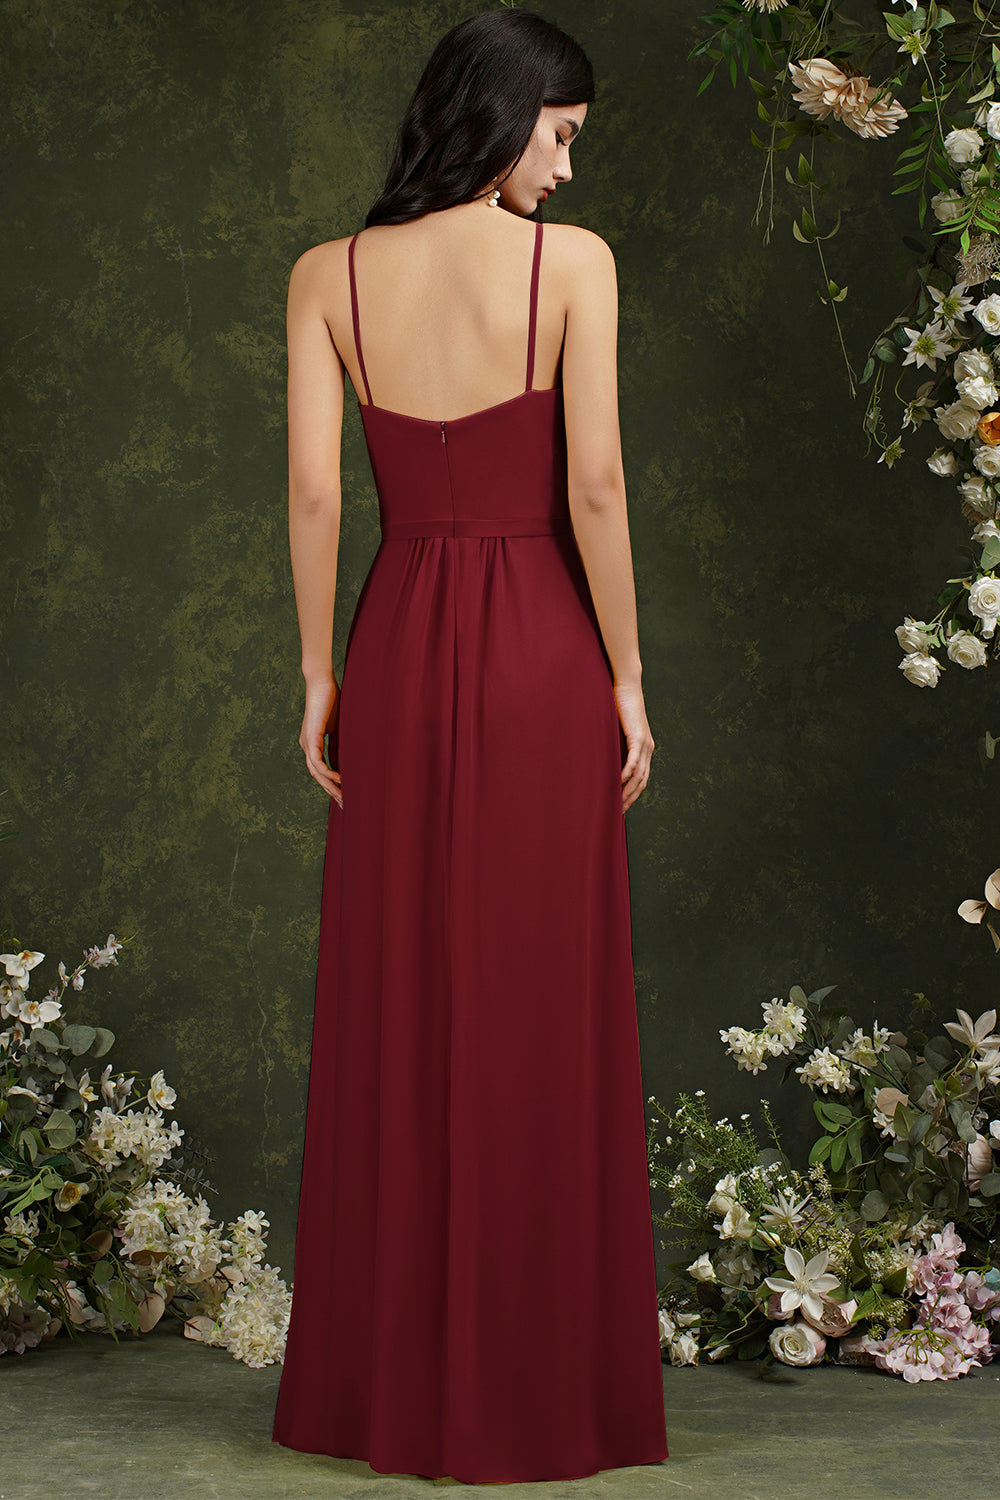 Load image into Gallery viewer, Long Halter Spaghetti Straps A-line Chiffon Bridesmaid Dress With Slit-BIZTUNNEL
